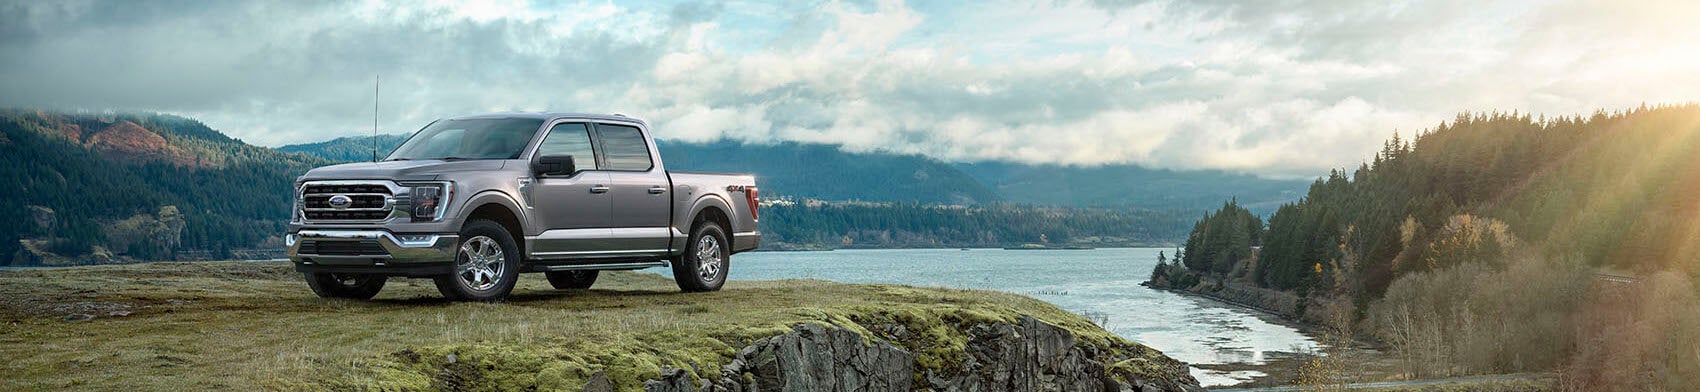 Ford F-150 Leasing